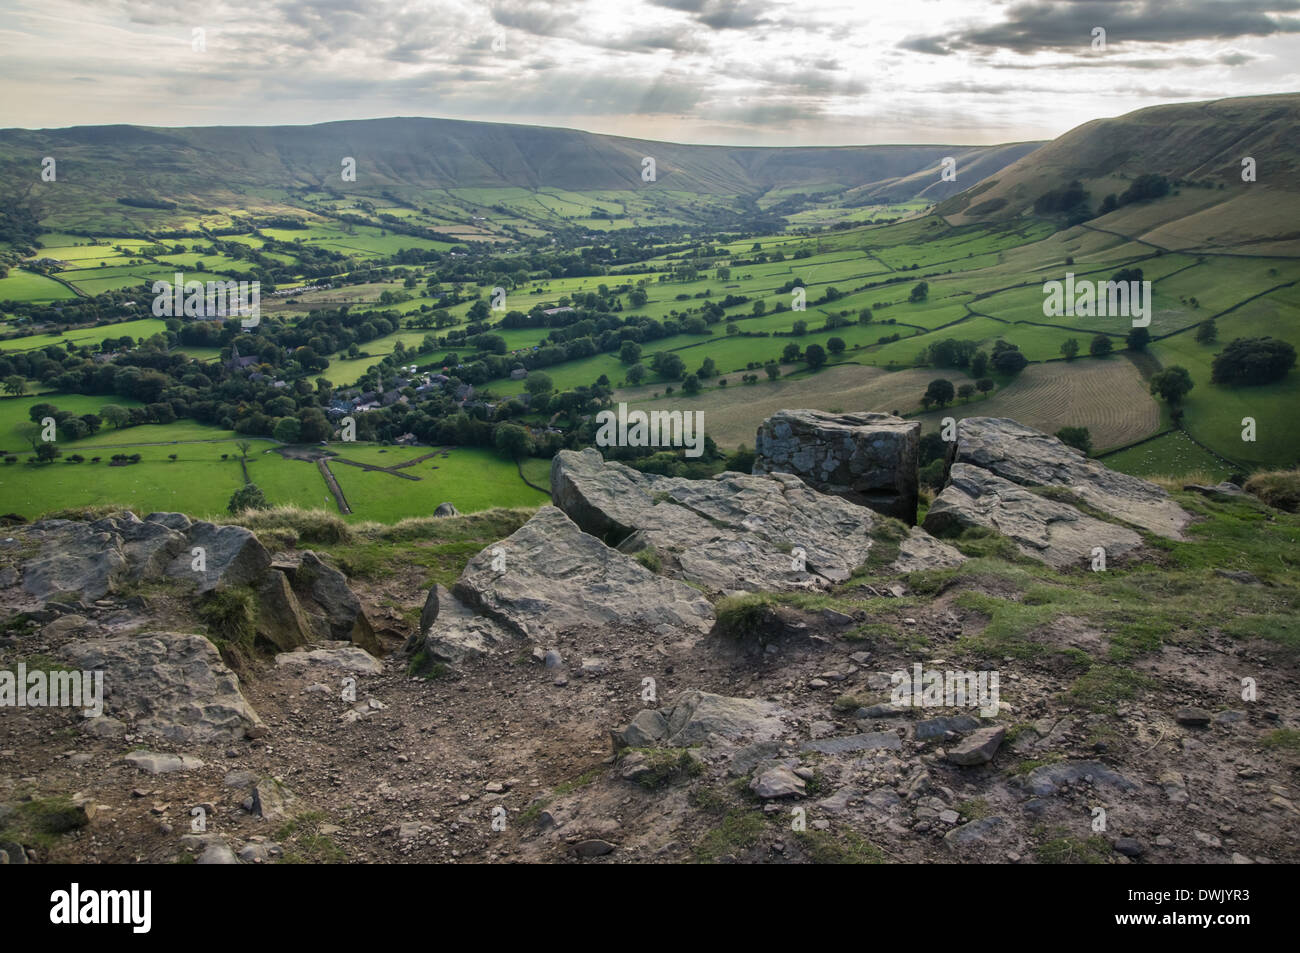 View of the Edale valley from The Nab in Peak District National Park Derbyshire England United Kingdom UK Stock Photo